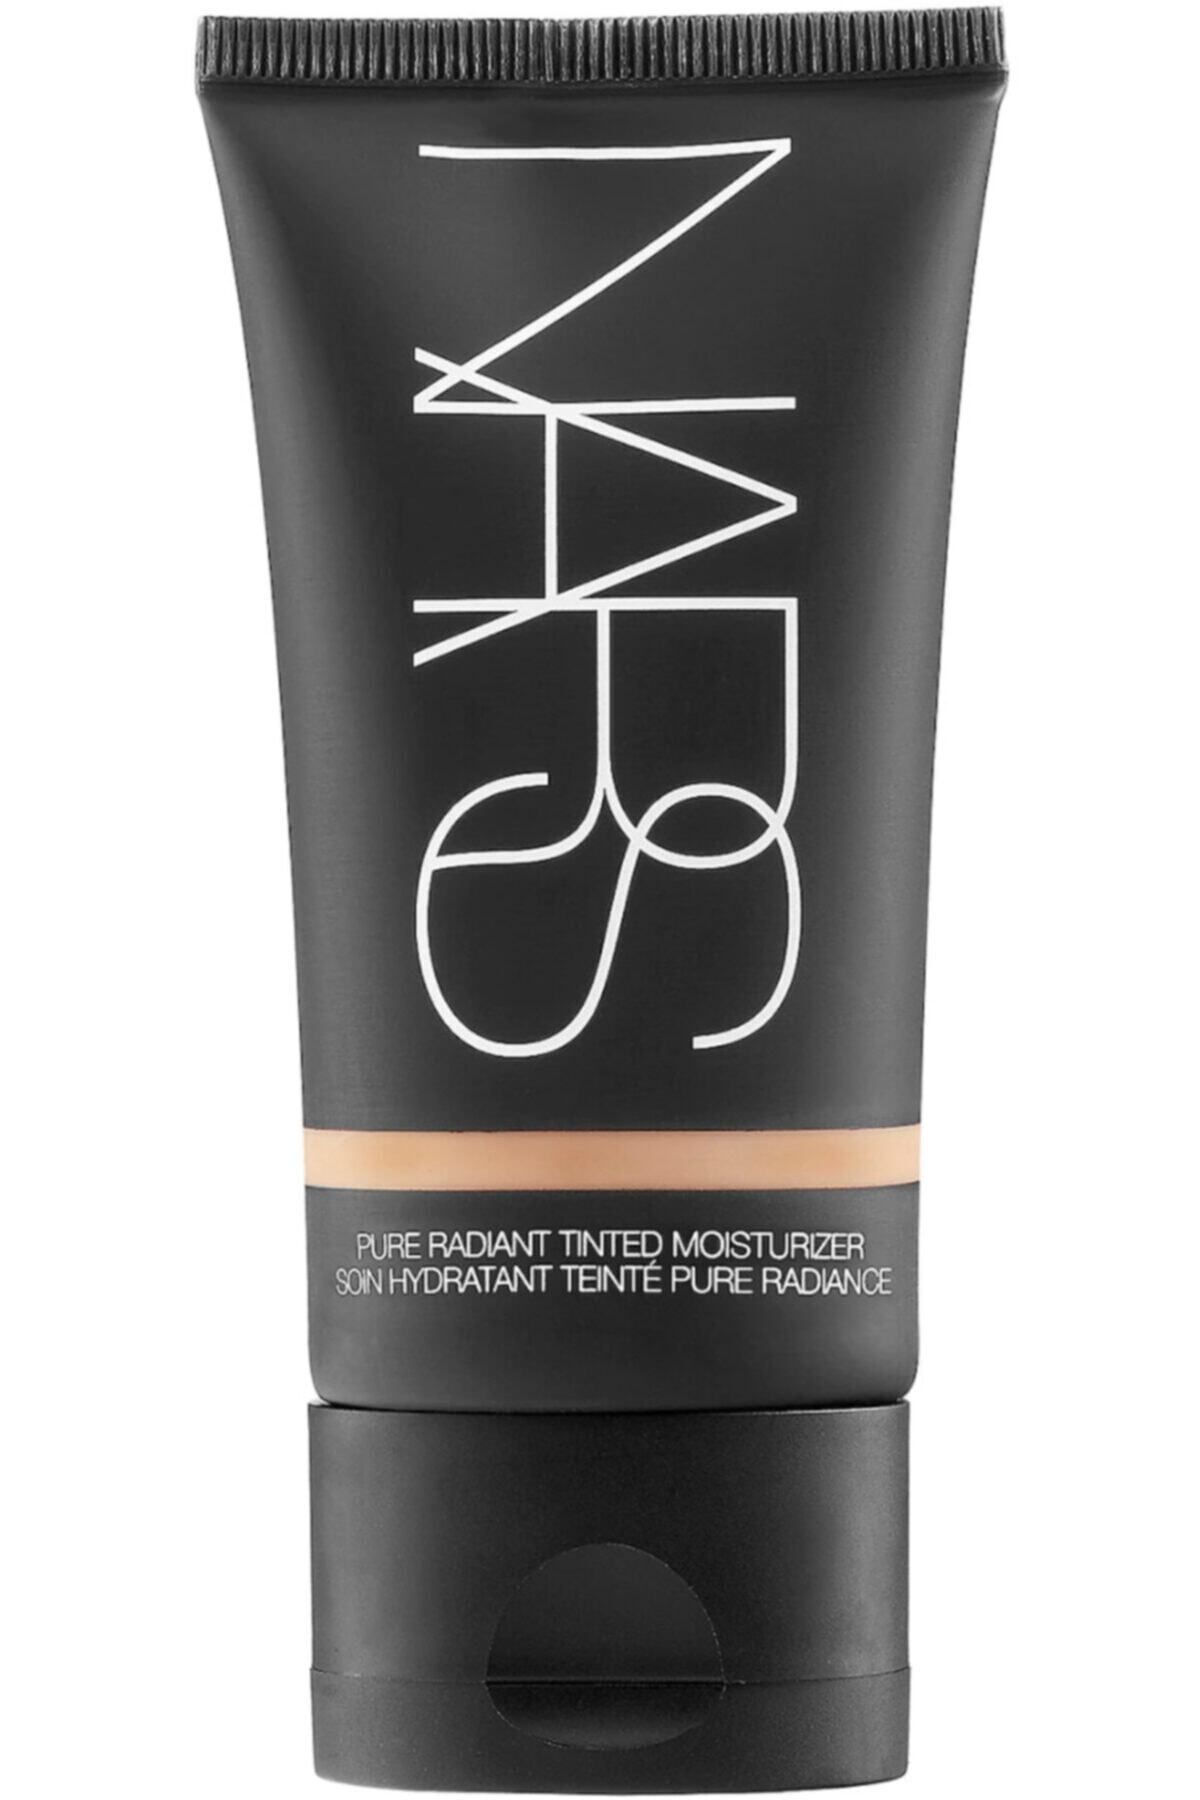 Nars Pure Radiant Tinted Moisturizer 56 Ml - EFFECTIVE Shooting839